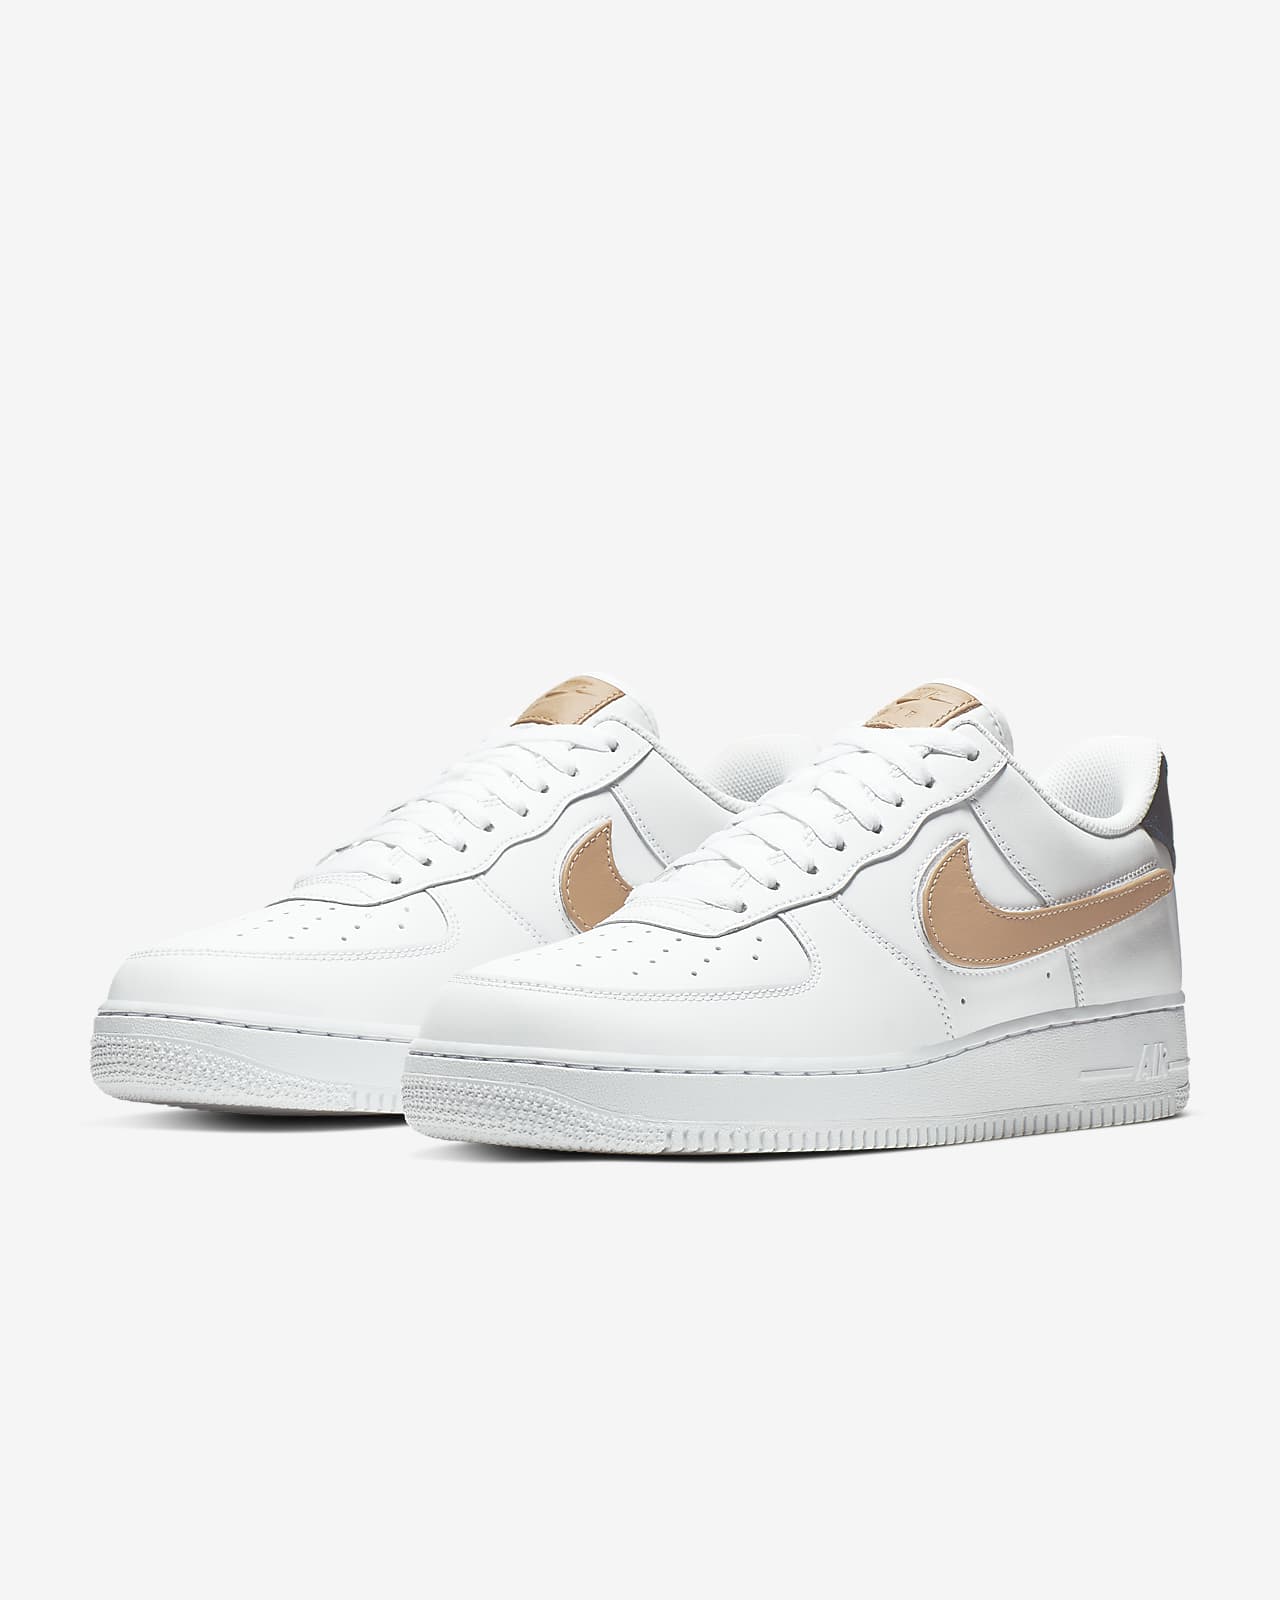 Chaussure Nike Air Force 1 '07 LV8 3 Removable Swoosh pour Homme